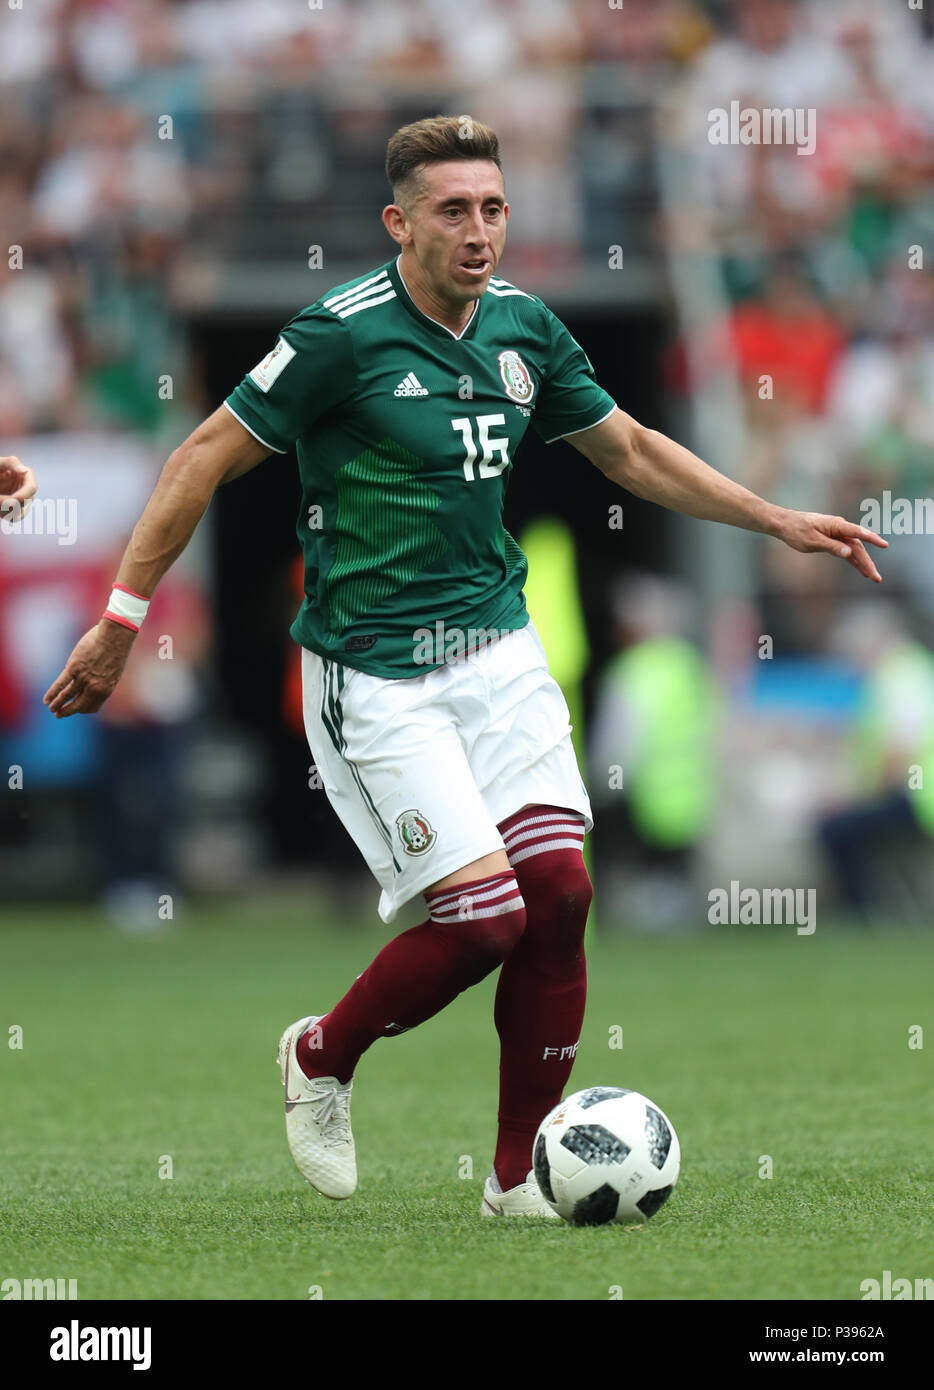 Hector Herrera MEXICO GERMANY V MEXICO, 2018 FIFA WORLD CUP RUSSIA 17 June 2018 GBC8321 Germany v Mexico 2018 FIFA World Cup Russia STRICTLY EDITORIAL USE ONLY. If The Player/Players Depicted In This Image Is/Are Playing For An English Club Or The England National Team. Then This Image May Only Be Used For Editorial Purposes. No Commercial Use. The Following Usages Are Also Restricted EVEN IF IN AN EDITORIAL CONTEXT: Use in conjuction with, or part of, any unauthorized audio, video, data, fixture lists, club/league logos, Betting, Games or any 'live' services. Also Restri Stock Photo